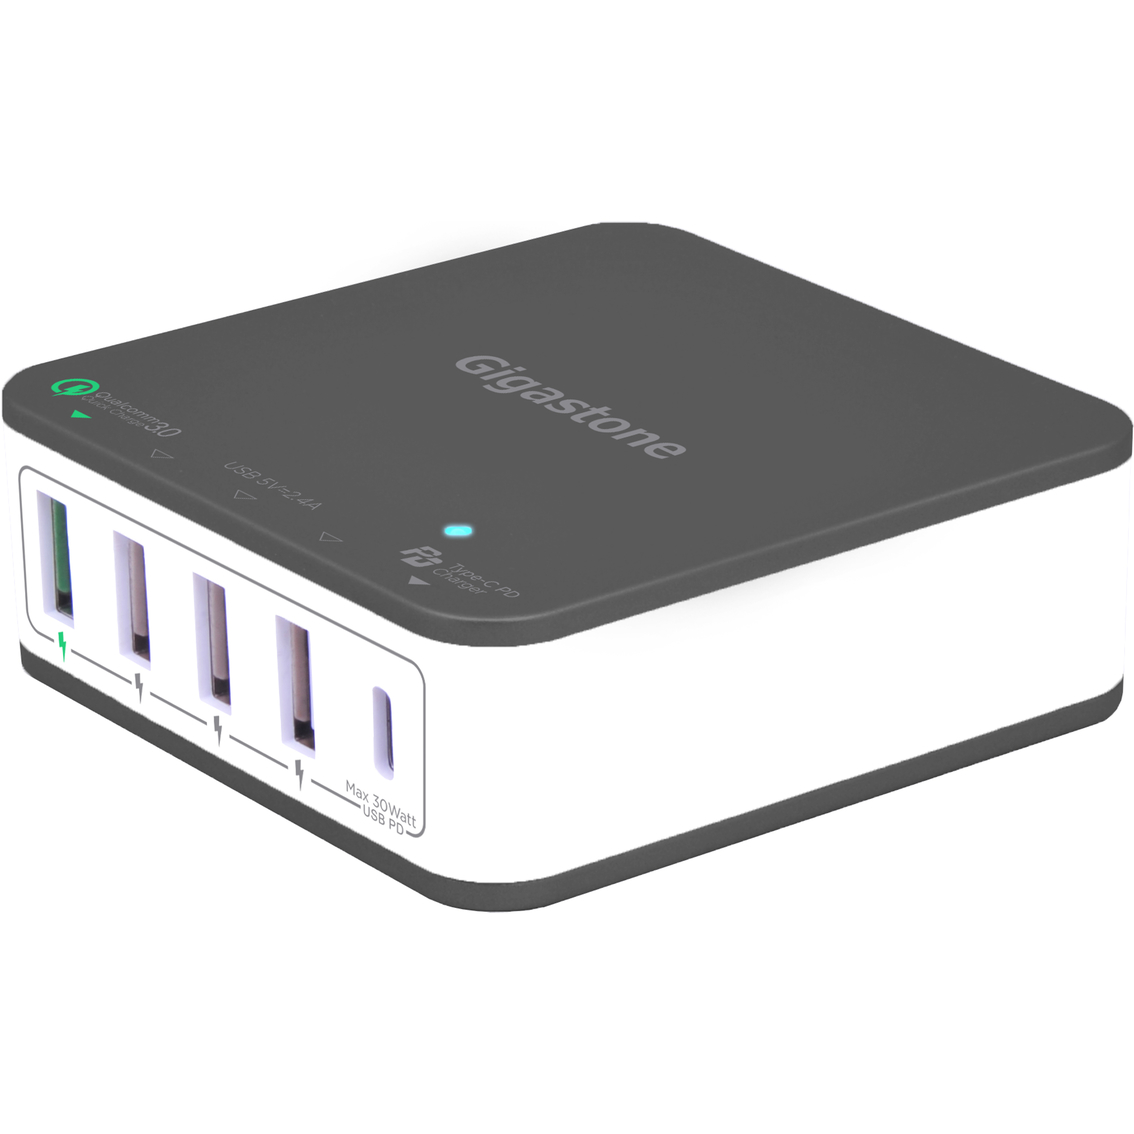 Gigastone USB-C  5 Port Wall Charger with QC3.0 Fast Charge and PD3.0 Type-C Port - Image 3 of 5